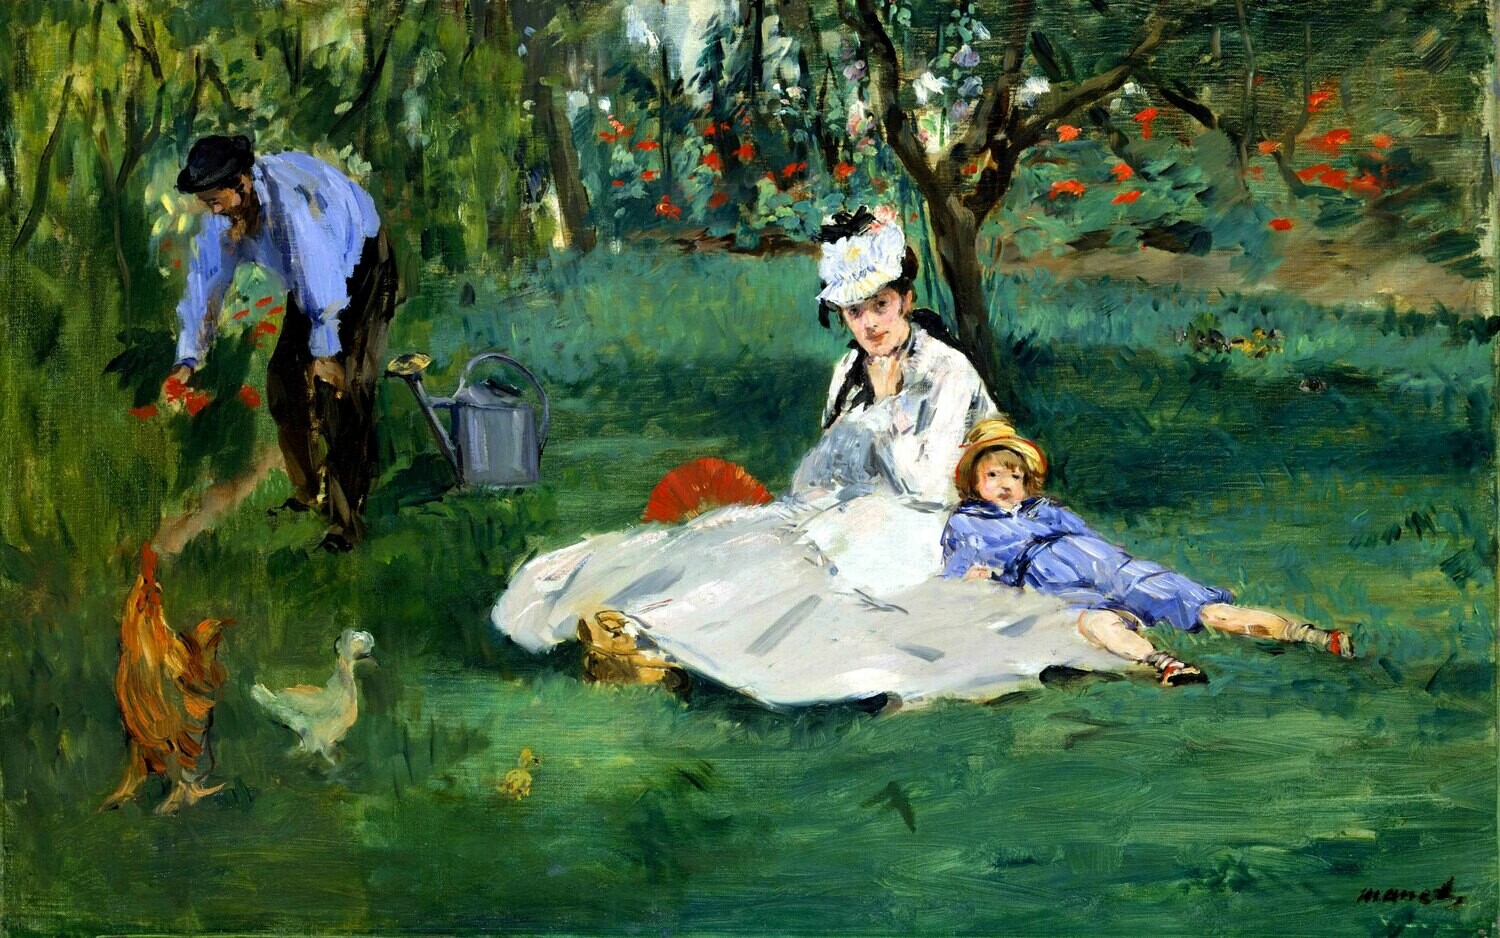 Edouard Manet | The Monet Family in Their Garden at Argenteuil